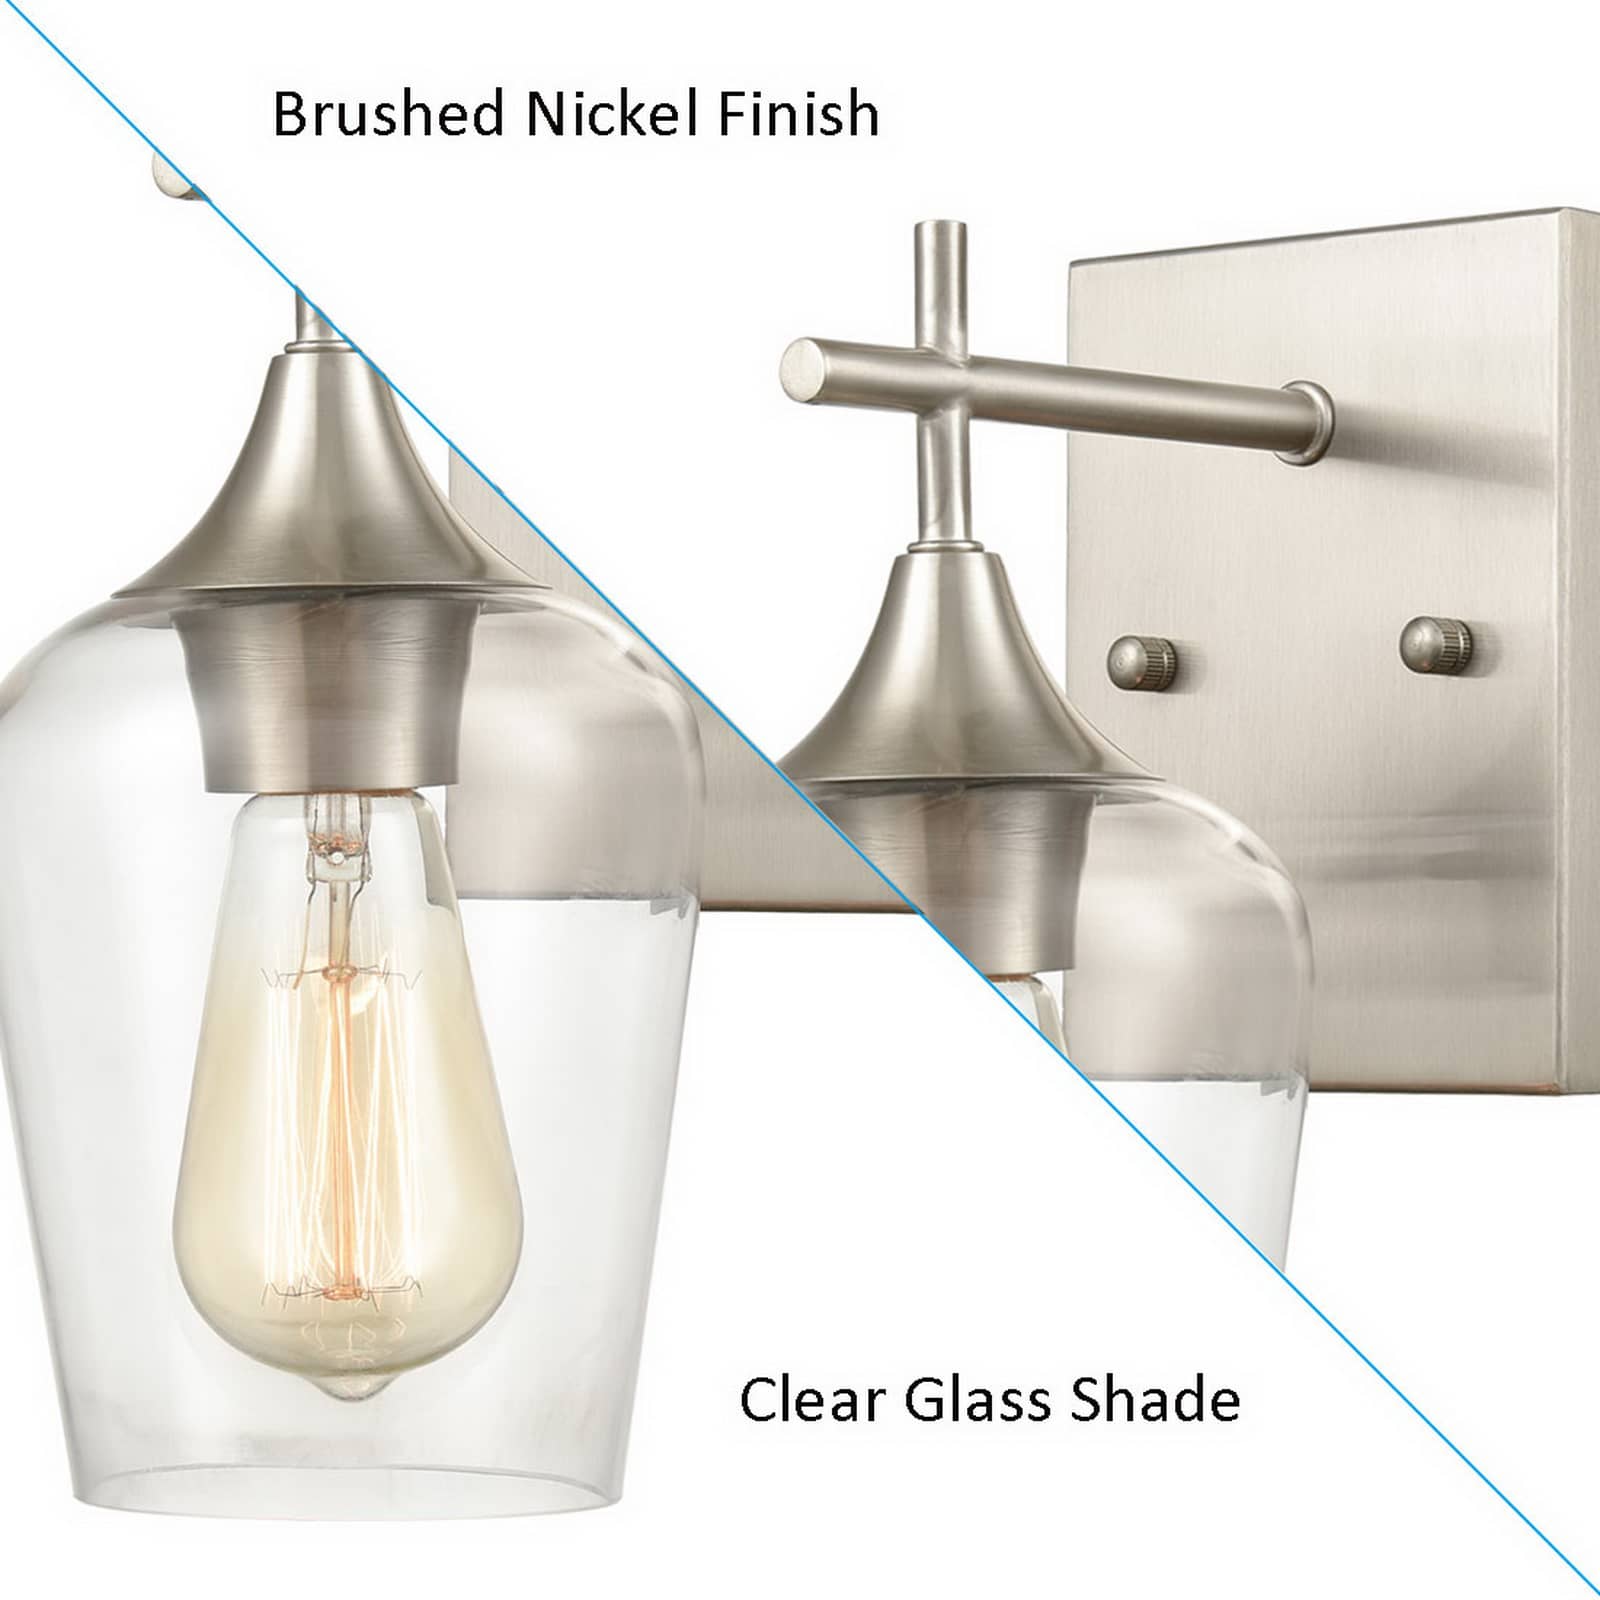 Modern Industrial Brushed Nickel Finish Details about   Light Society Cressley Wall Sconce 